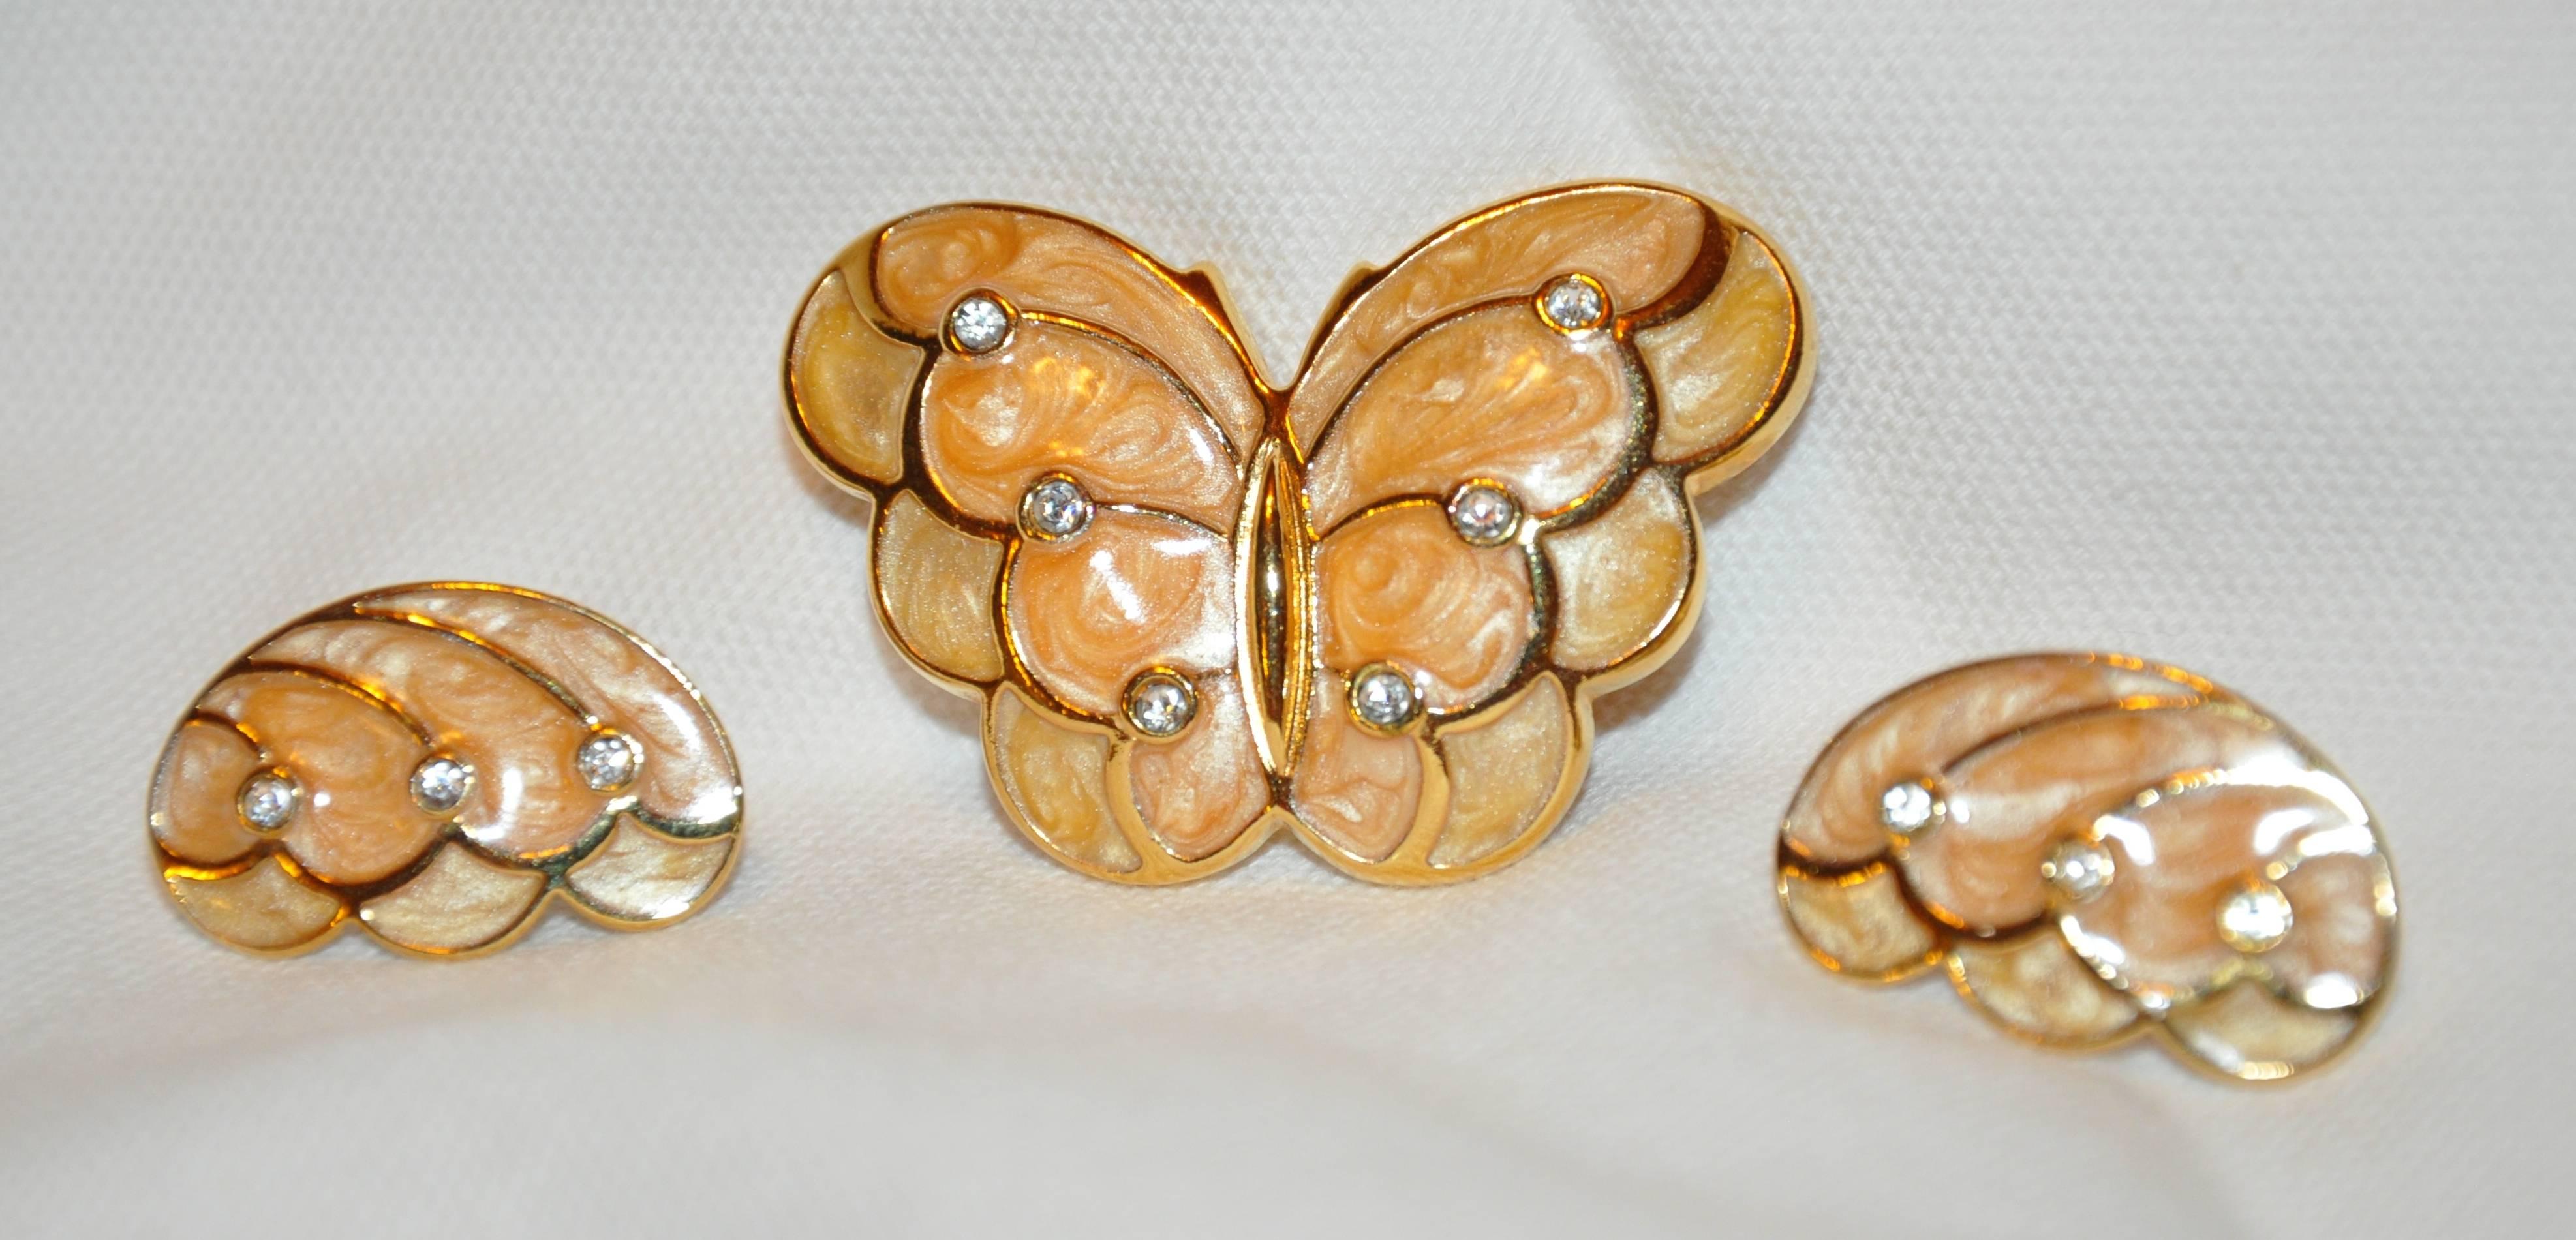          Kenneth Jay Lane's  wonderful gilded gold vermeil hardware accented with "Swirls" of enamel and finished with faux diamonds matching brooch and earrings makes for a elegant set. The brooch measures  1 7/8 inches x 1 1/4 inches.